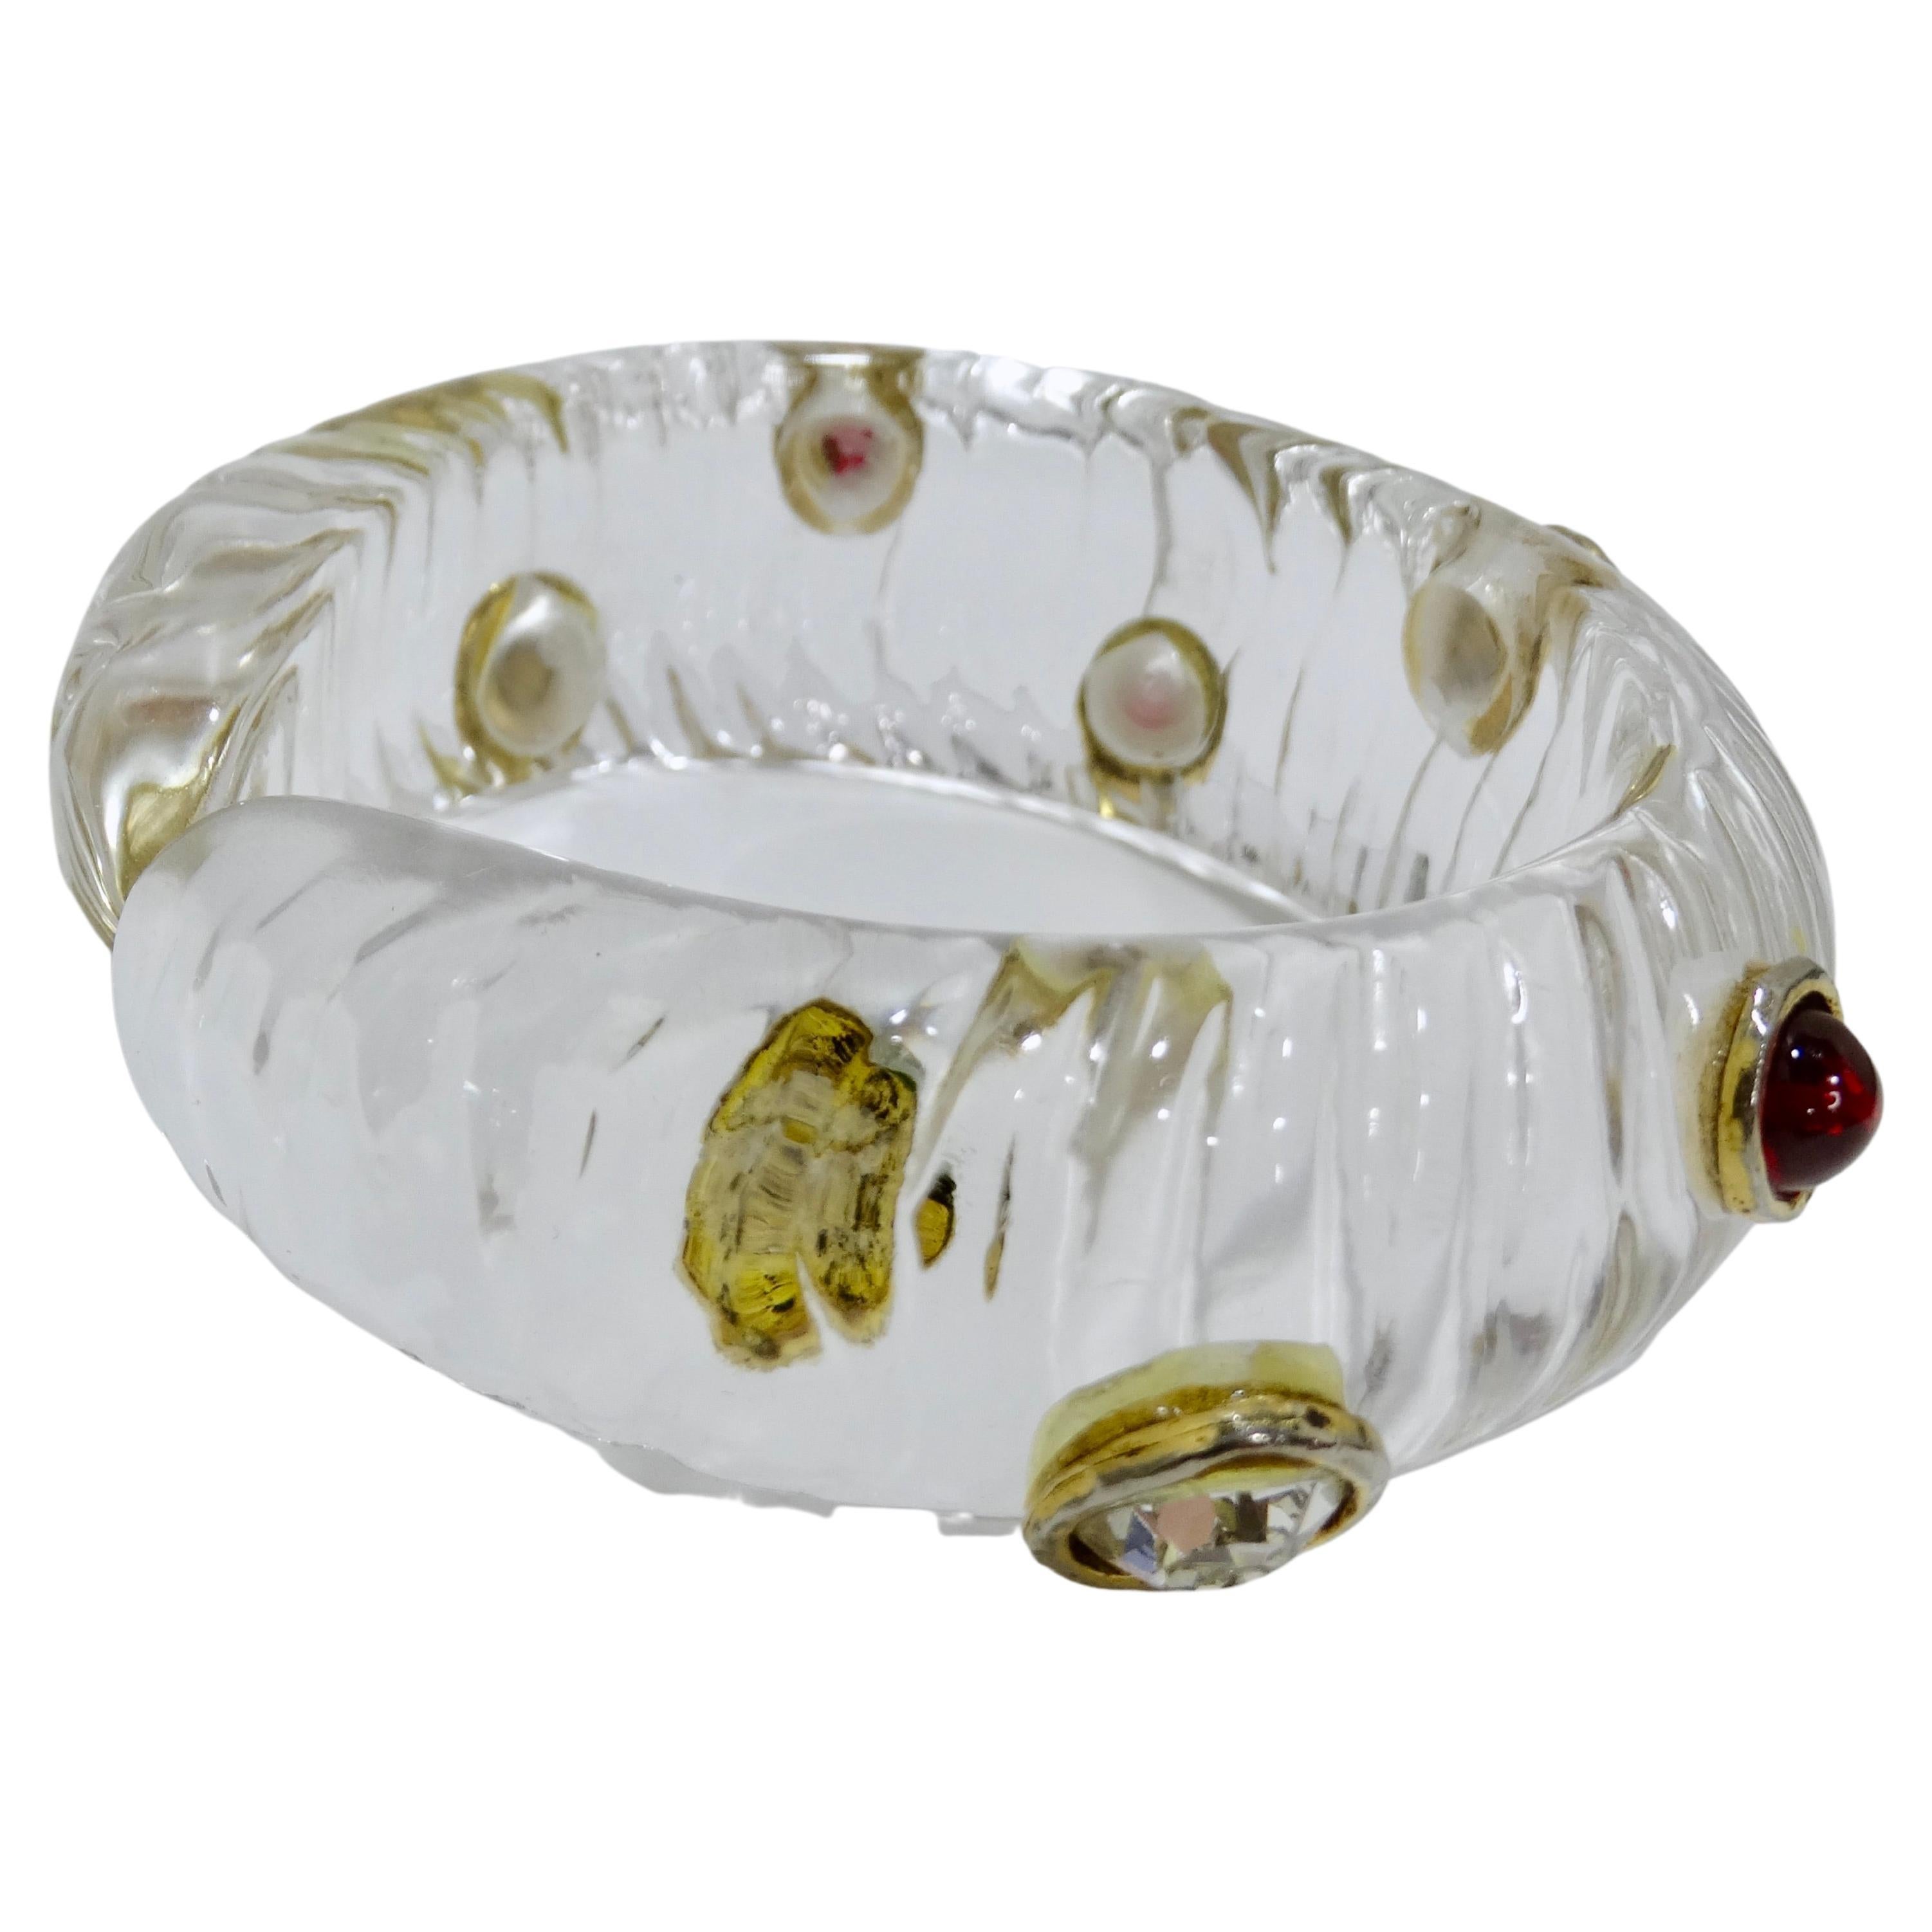 This vintage Chanel cuff will take you right back to the 70's and not in a bad way. Accessorize the right way by adding a little oomph to your outfit with a beautiful and unique cuff. This item features details like clear Lucite and Gripoix glass